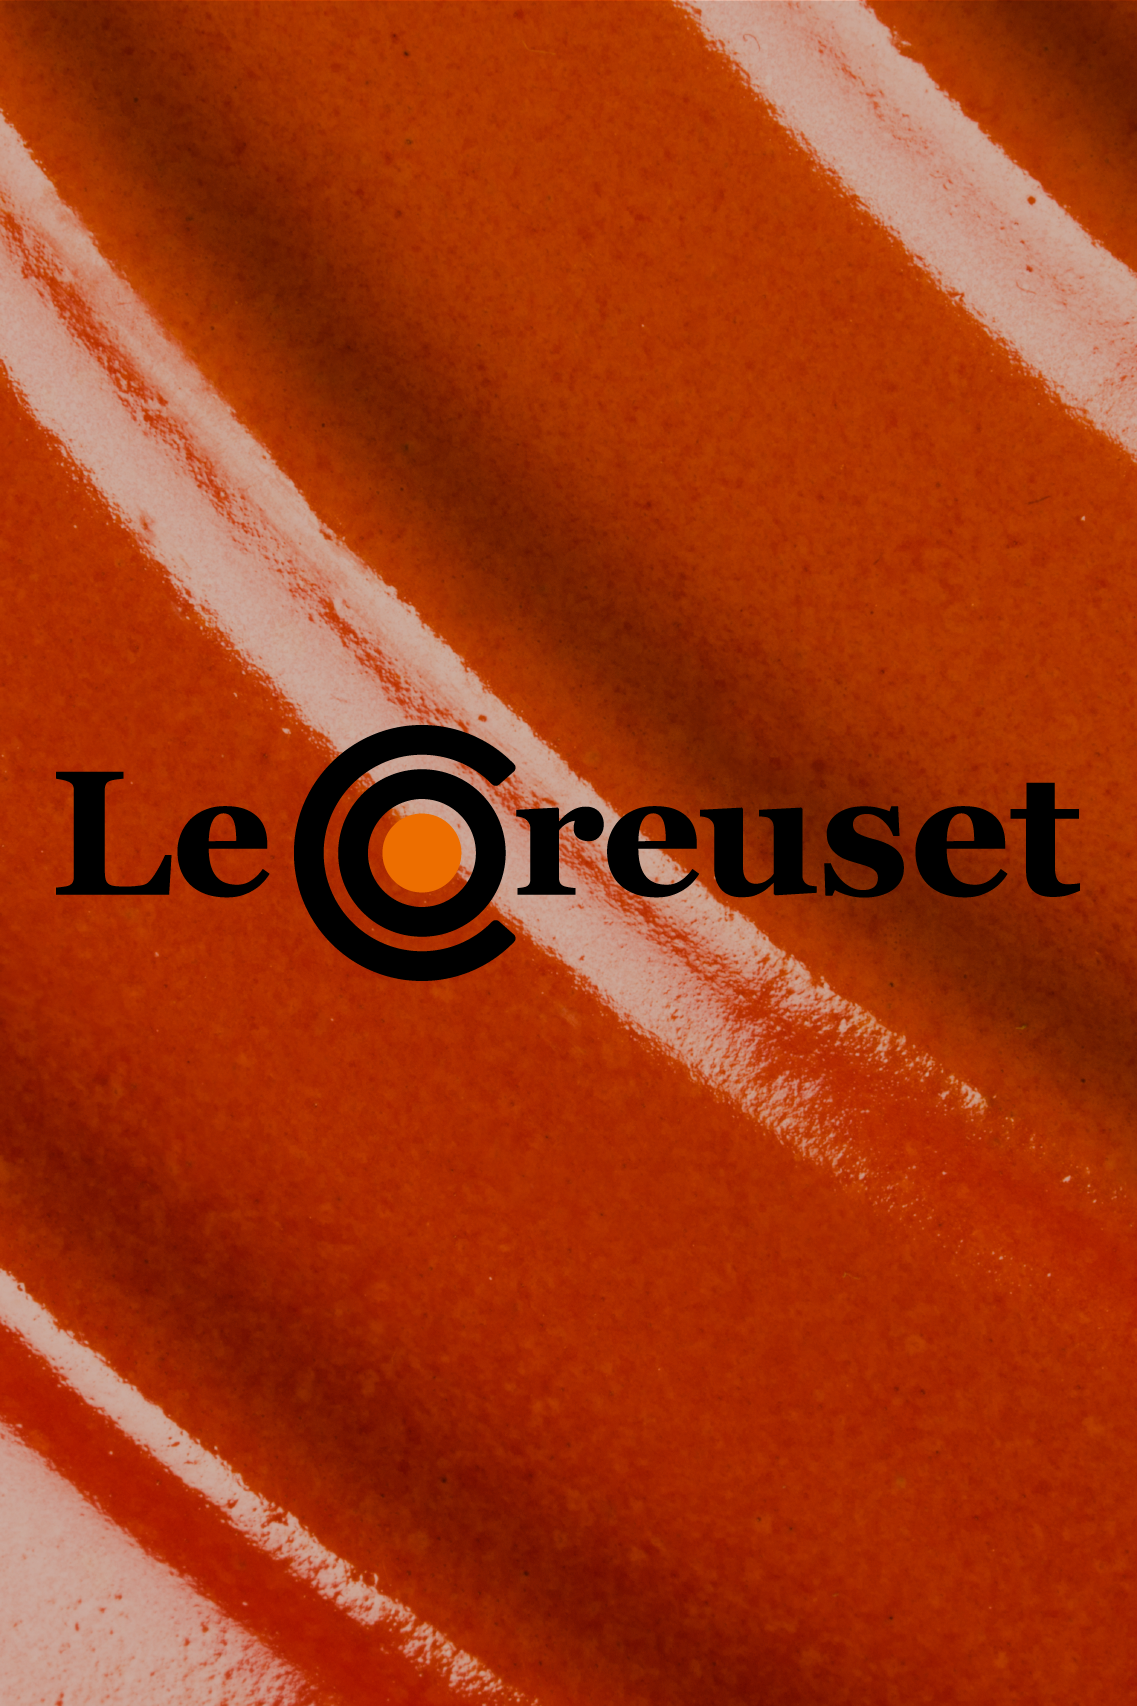 Le Creuset logo redesign proposal by Xavier Wendling